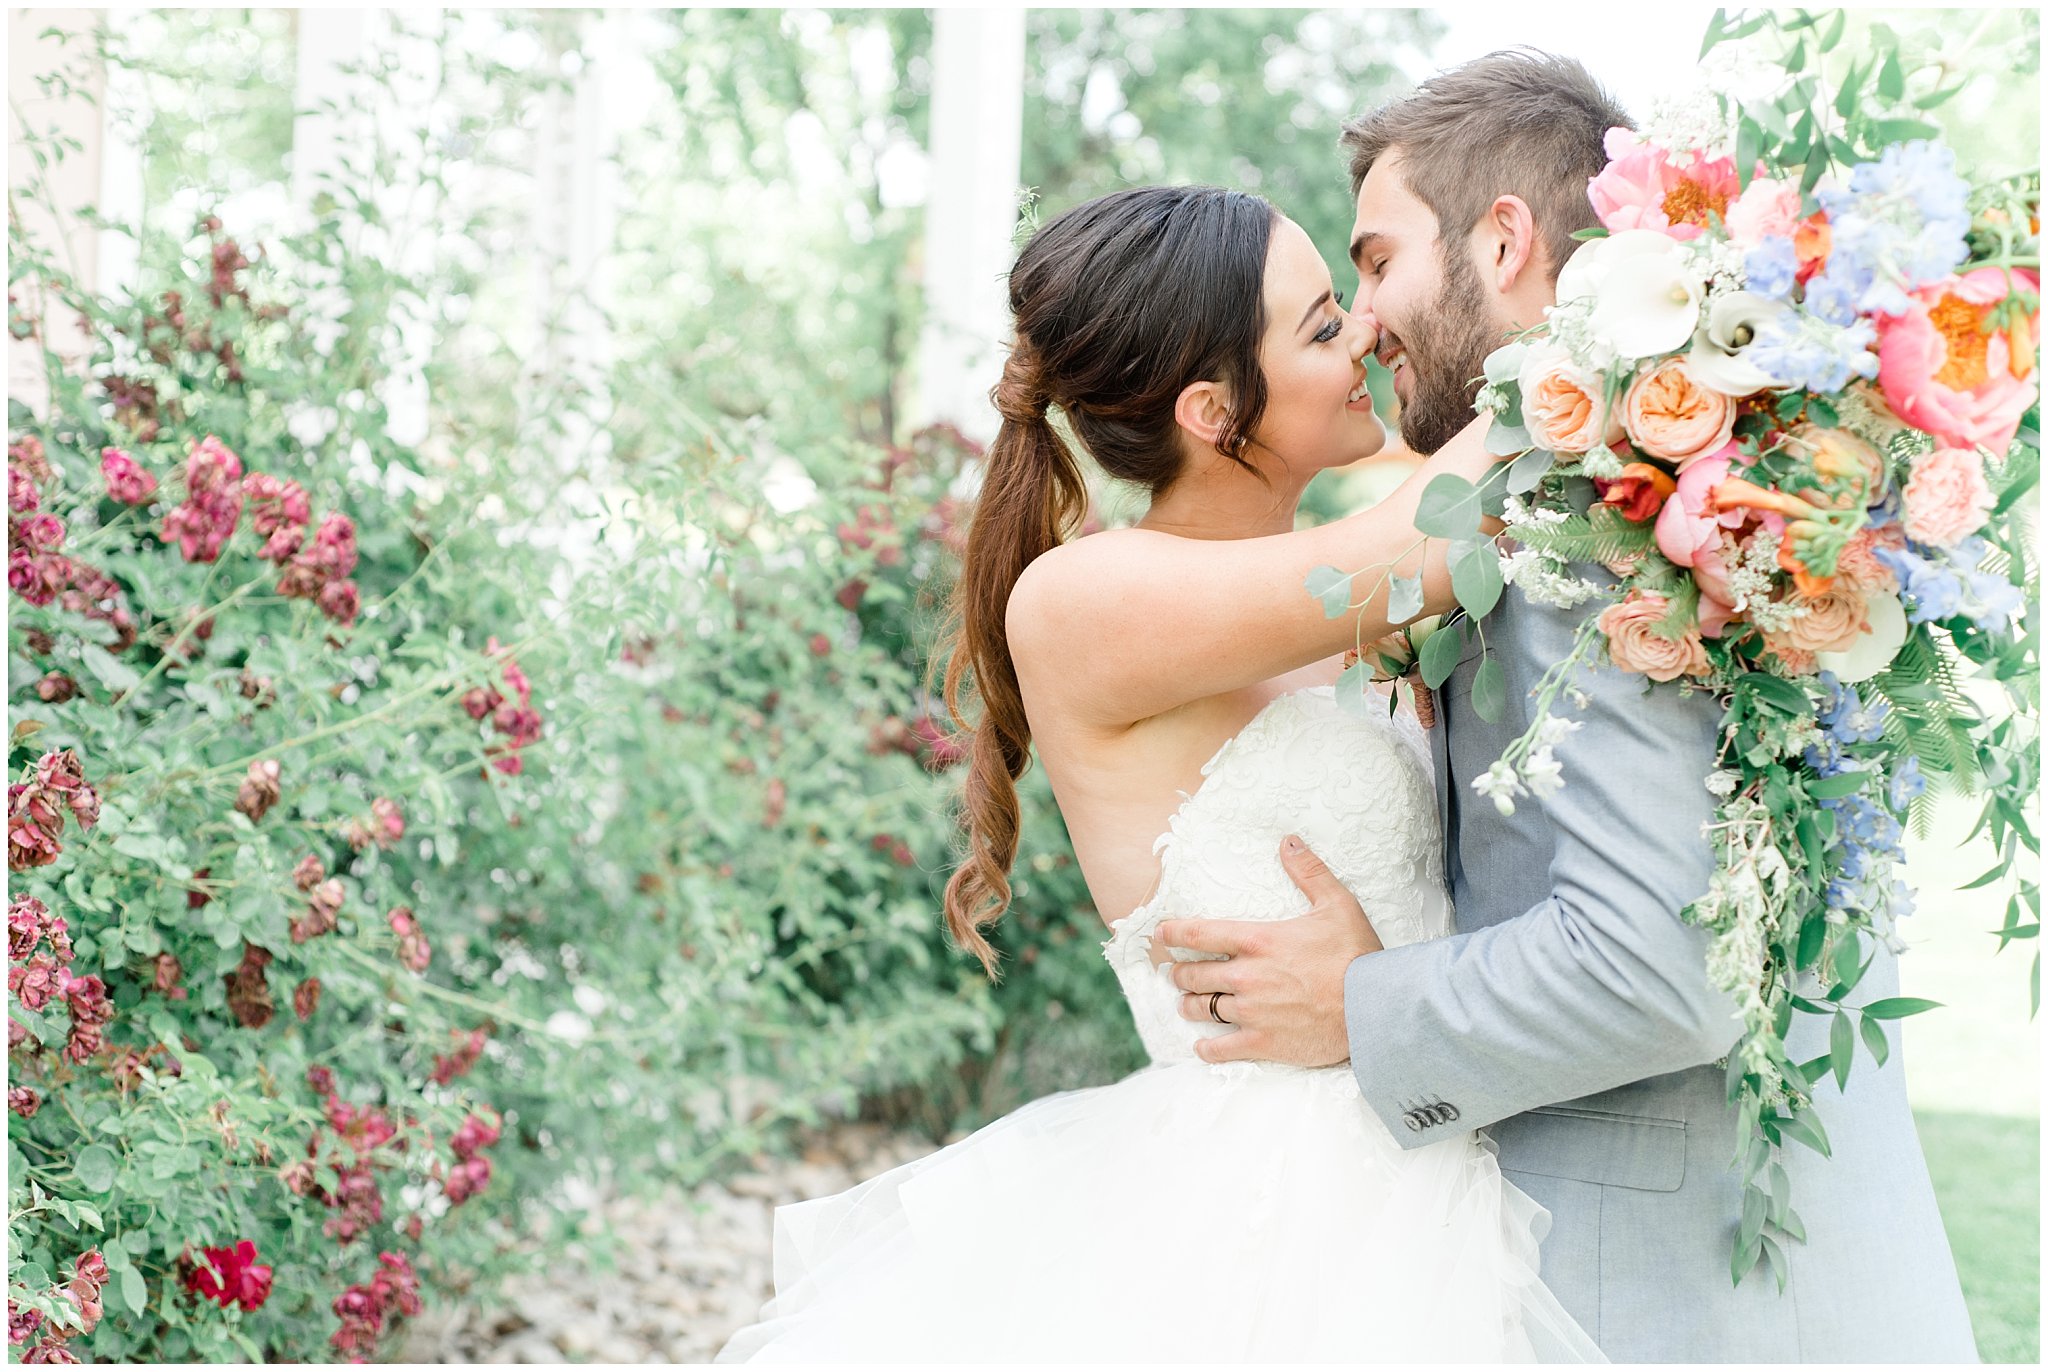 Bride and groom kissing in garden | This is the Place Heritage Park | Green and Pink Garden Wedding | Jessie and Dallin Photography